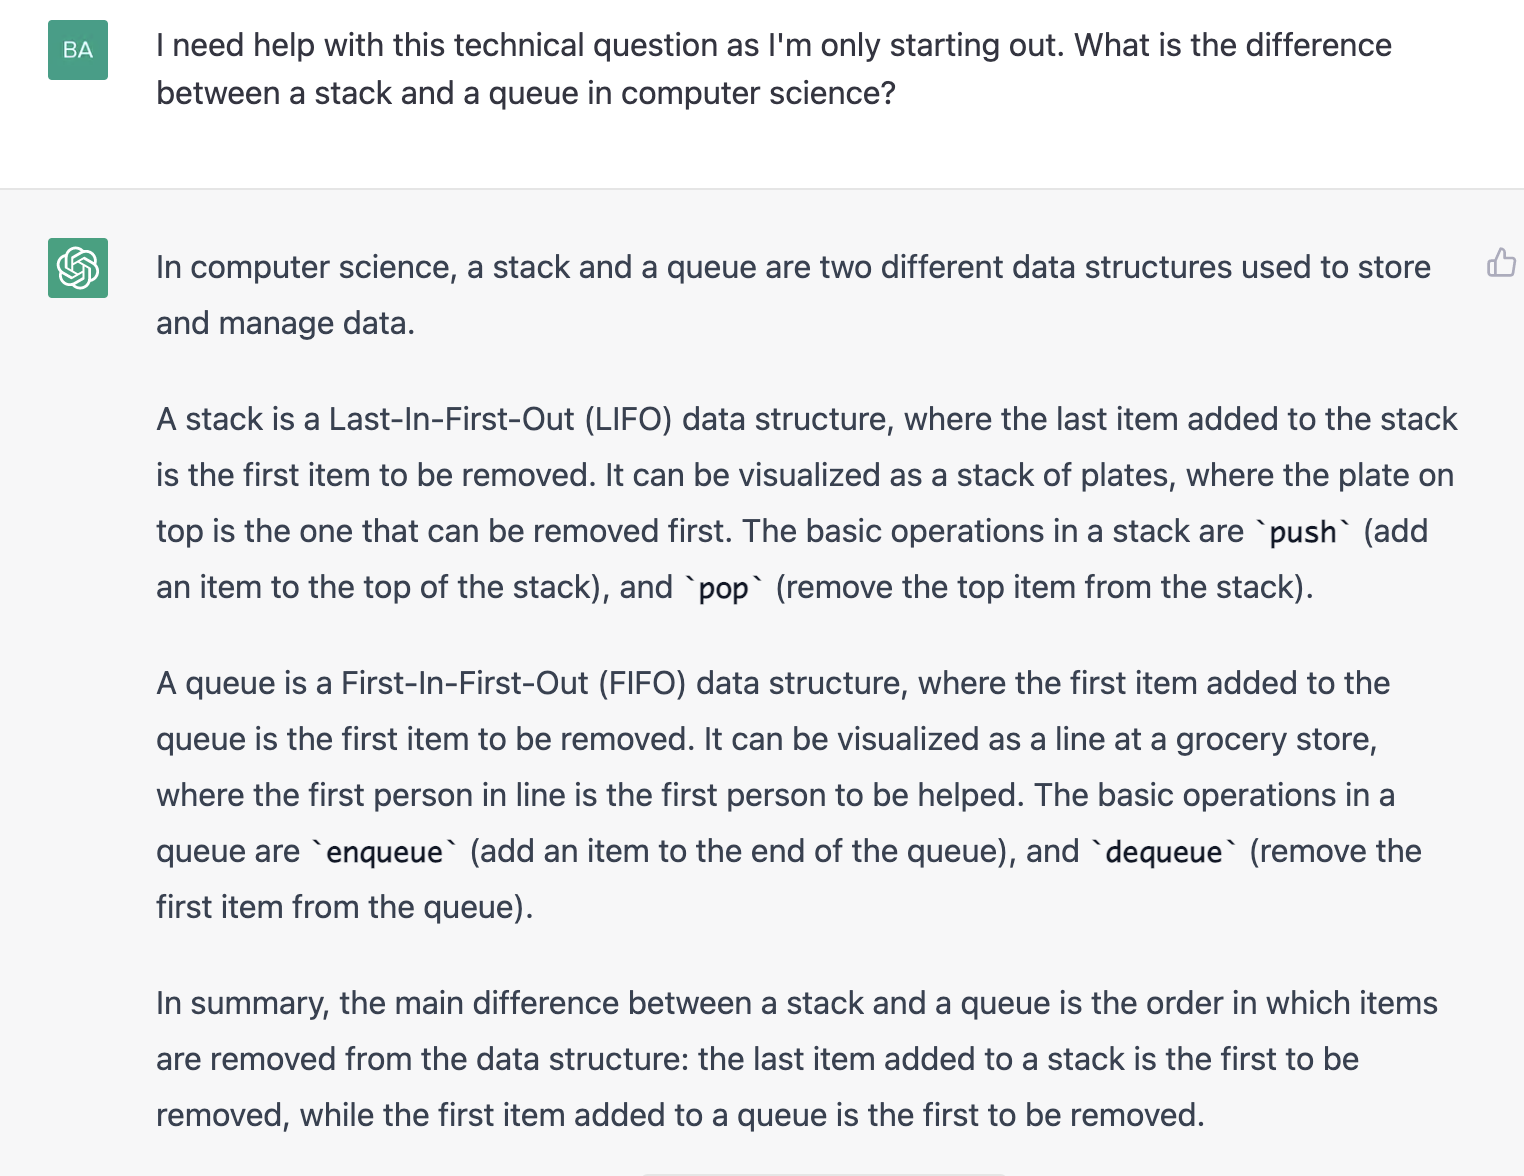 ChatGPT prompt about the difference between a stack and a queue in computer science